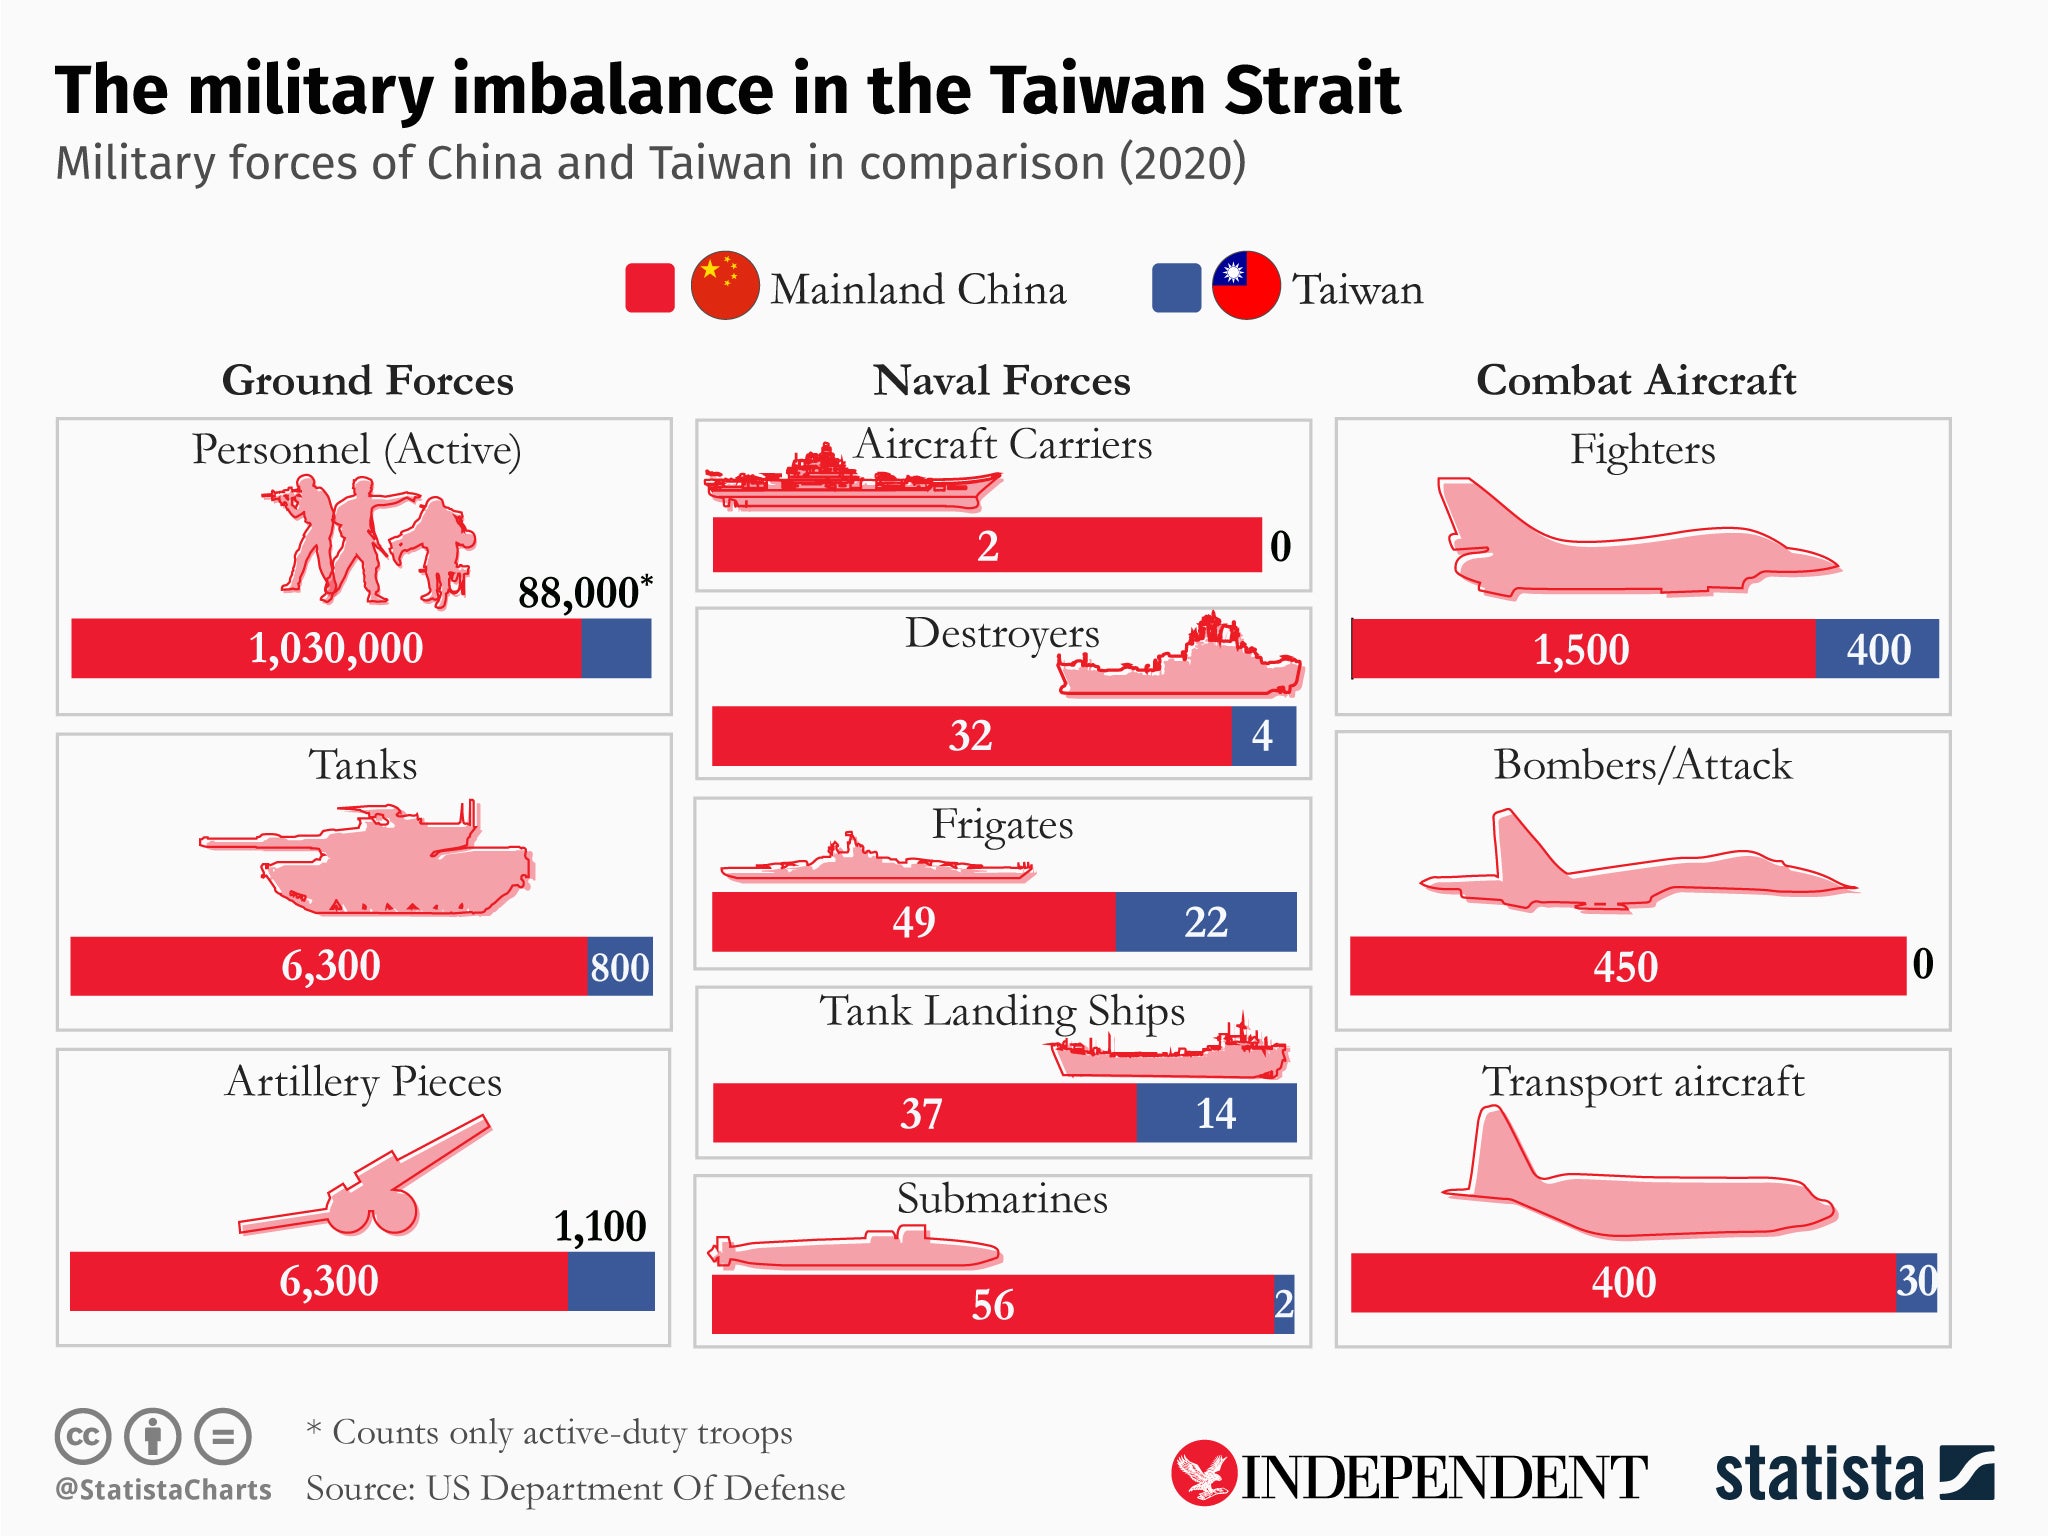 David and Goliath: How China and Taiwan square up